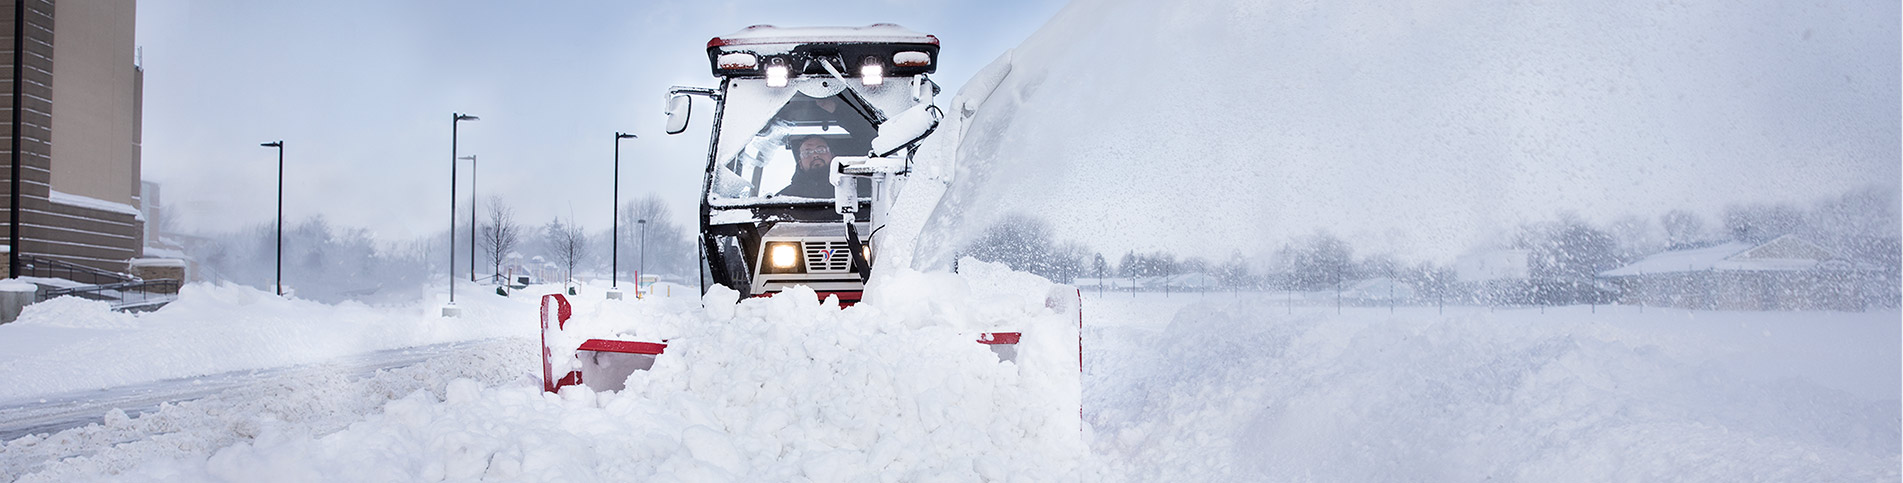 Most Essential Tools To Remove Snow From Your Car